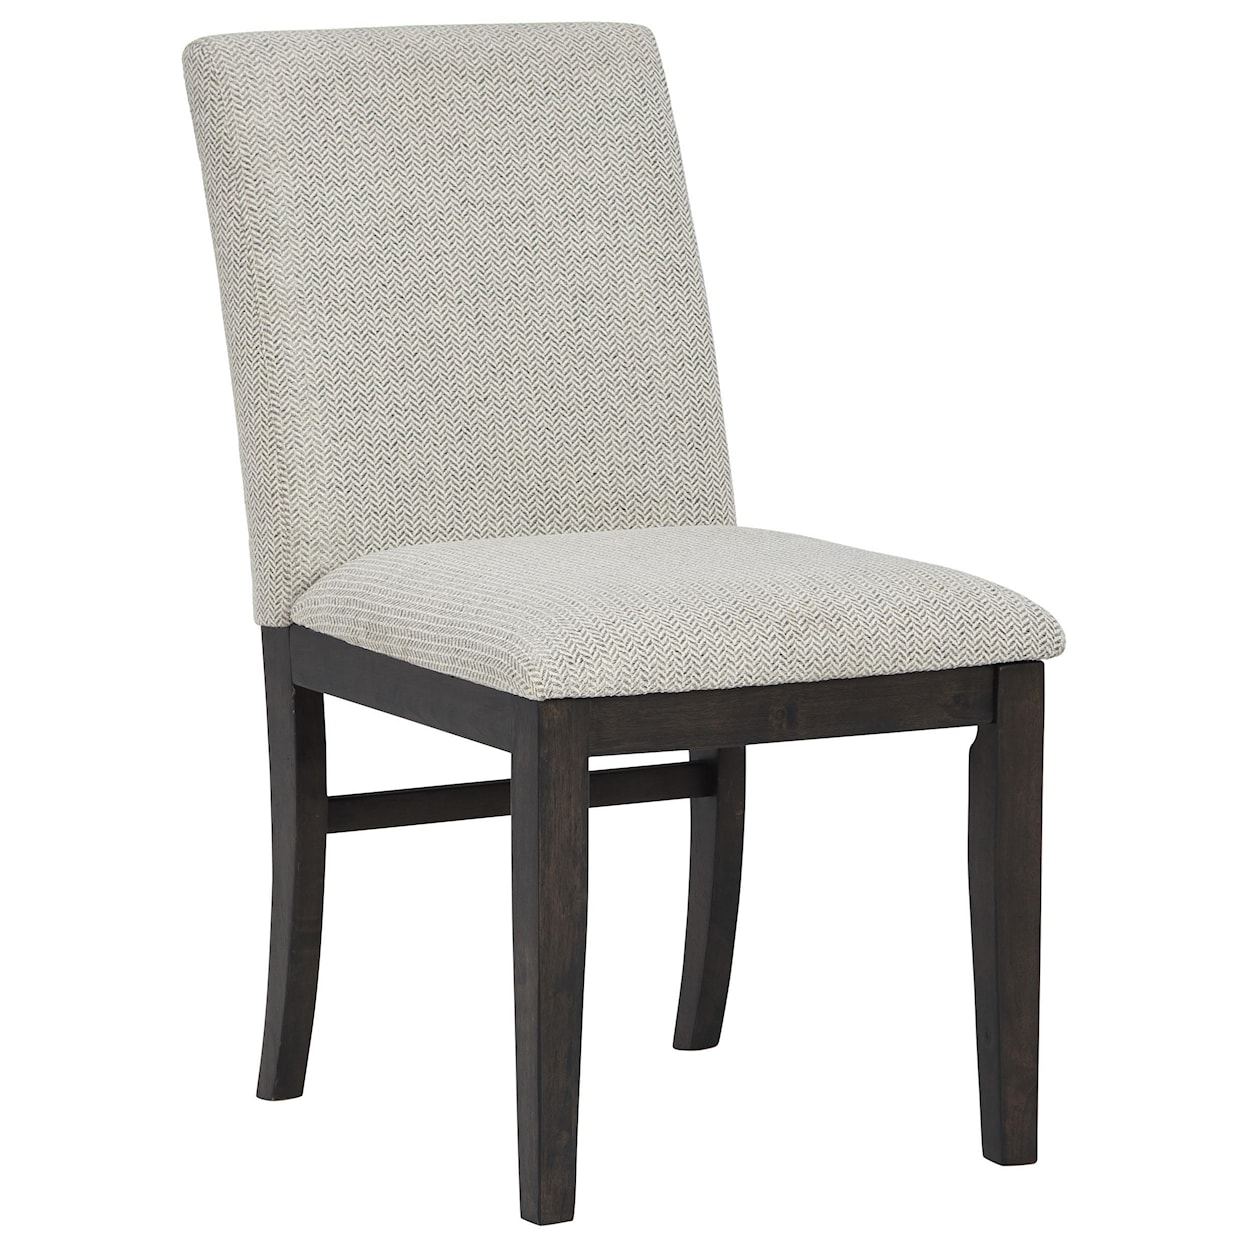 Millennium Bruxworth Dining Upholstered Side Chair